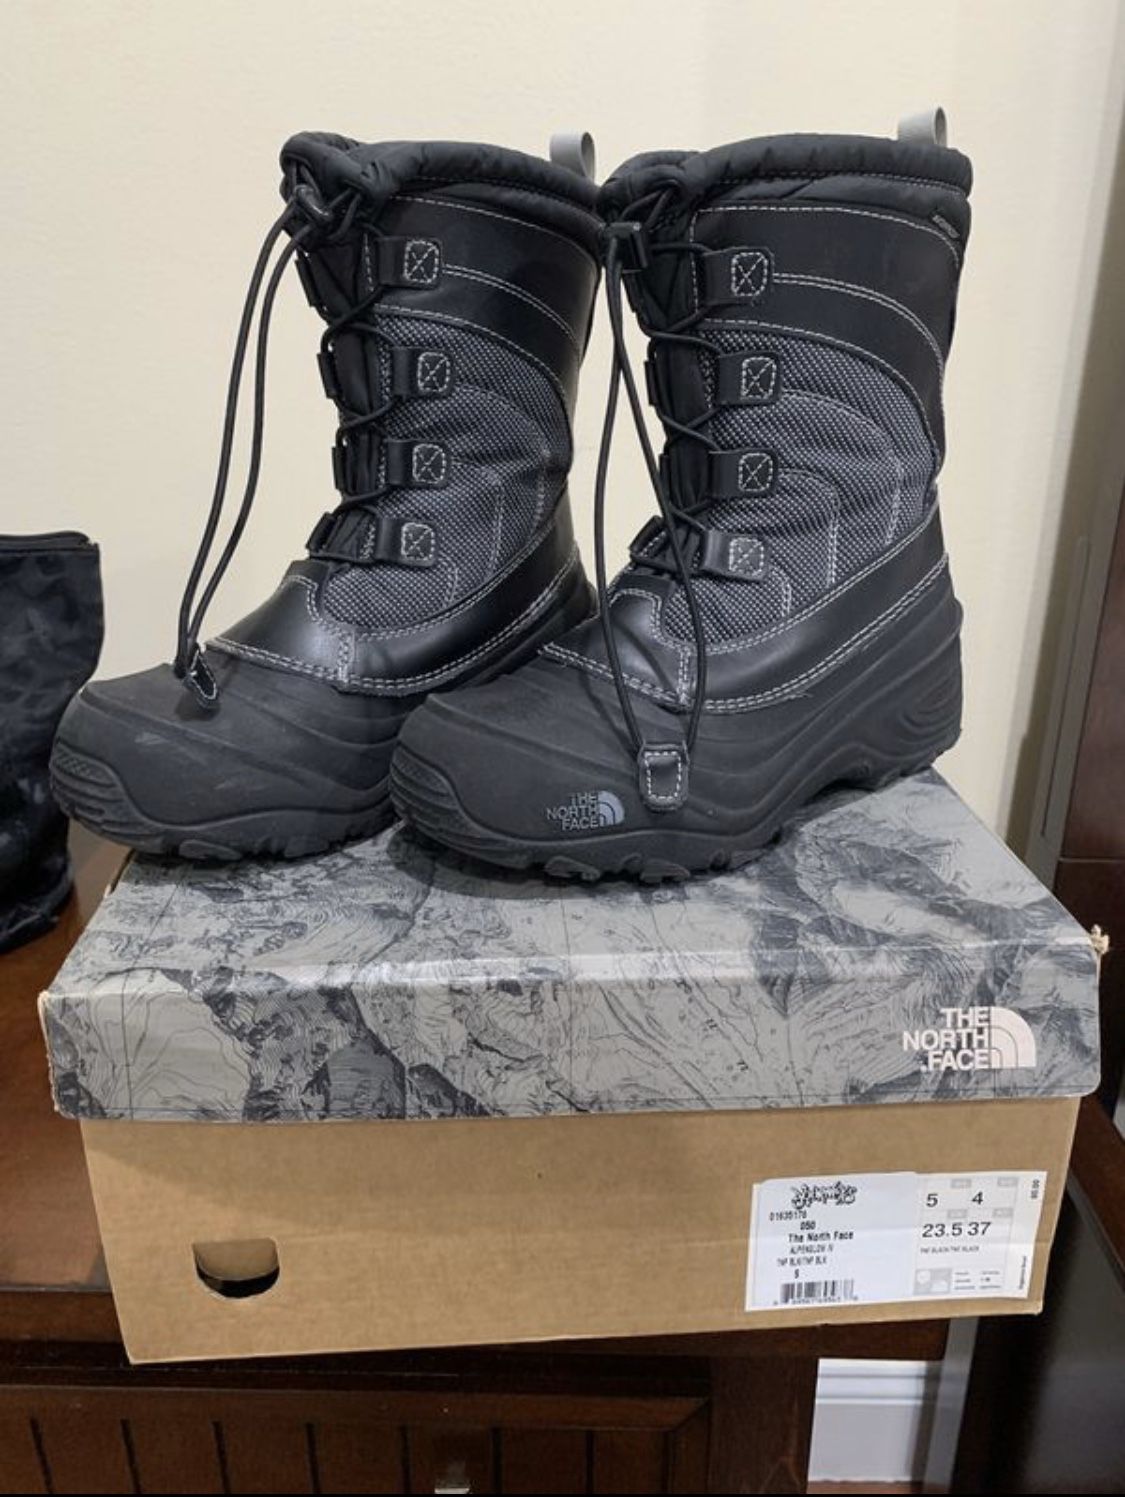 Kids north face winter/snow boots, size 5, $20